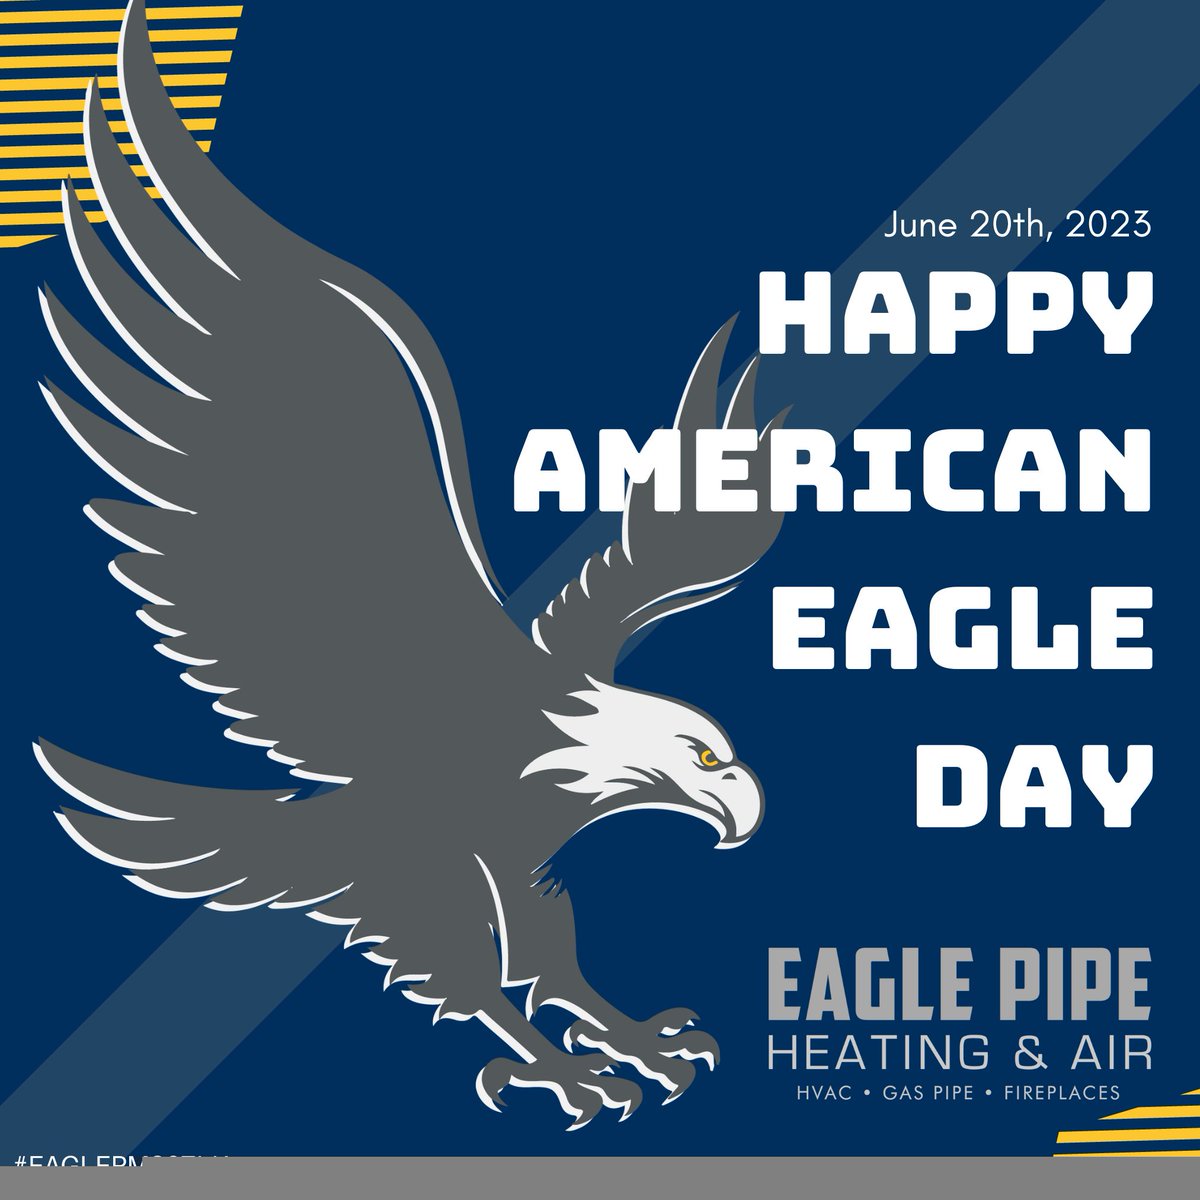 Happy American Eagle Day from all of us at Eagle Pipe Heating and Air! 🦅 As proud as the majestic eagle, we are dedicated to providing top-quality HVAC services for your home comfort needs. Let us help you soar above the rest! #AmericanEagleDay #HVACExperts #HomeComfort